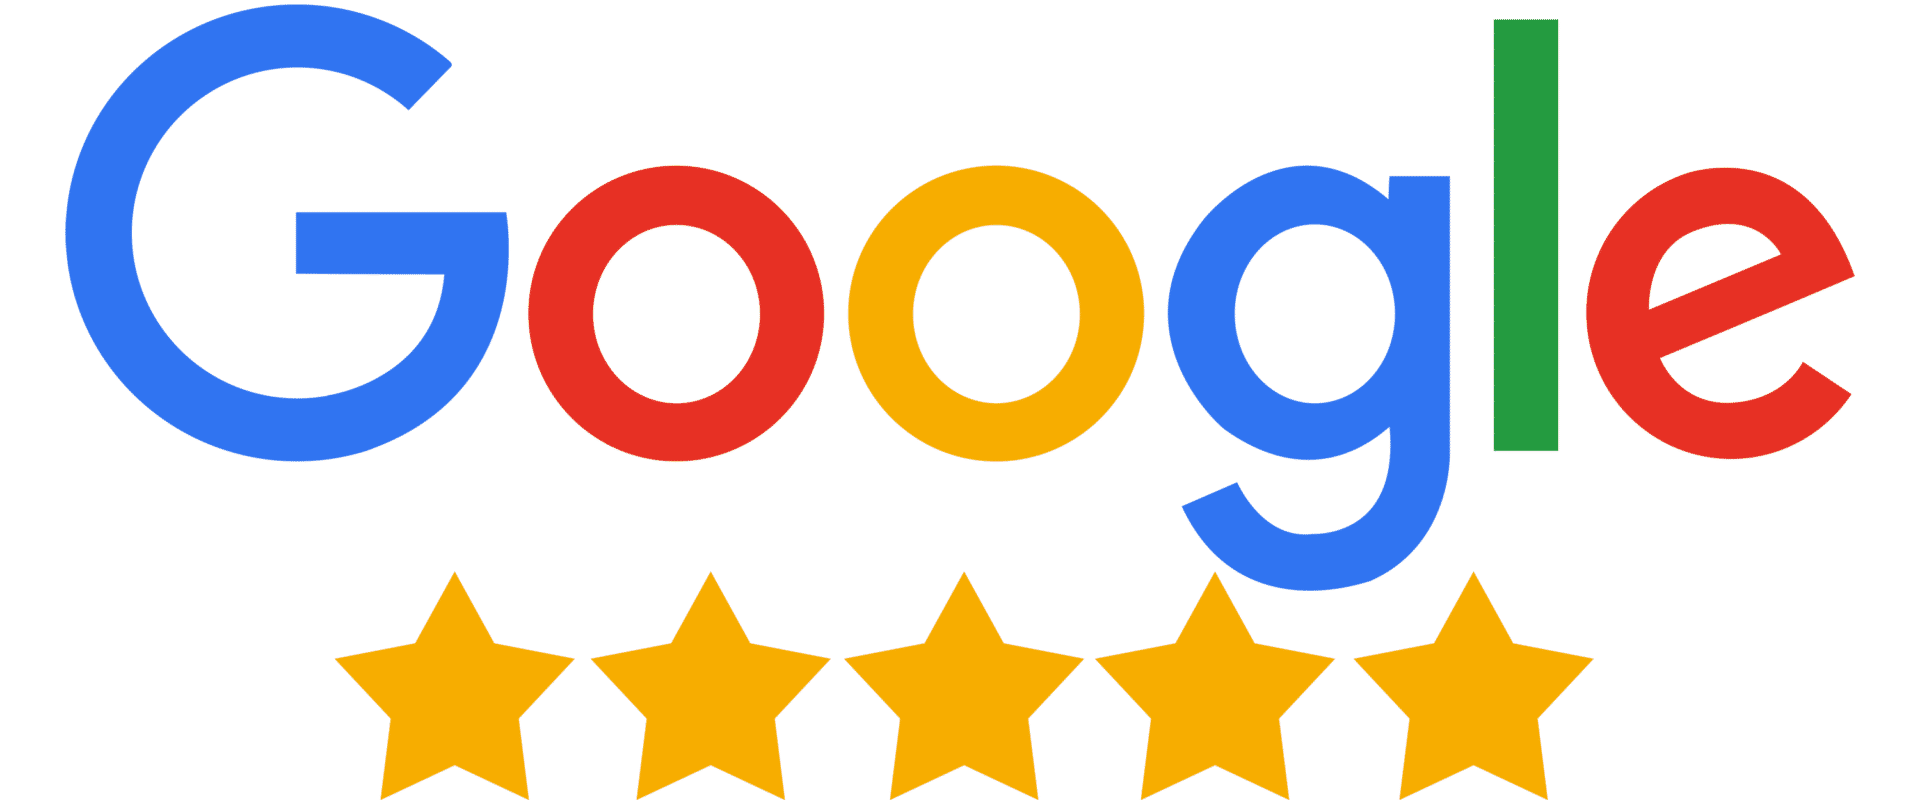 Seattle best 5 star review house cleaning